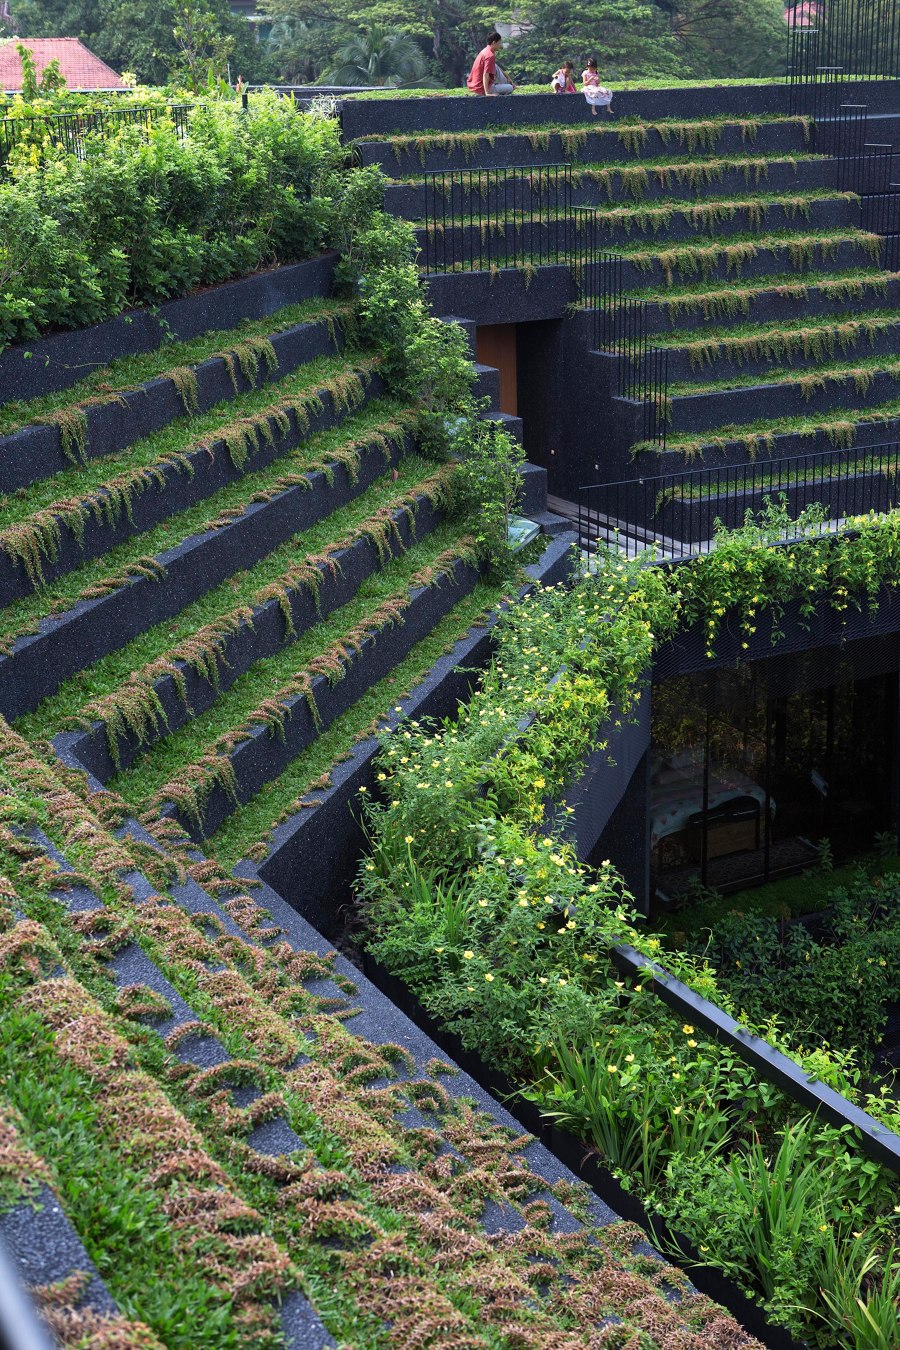 Things are looking up: roof gardens | Novità